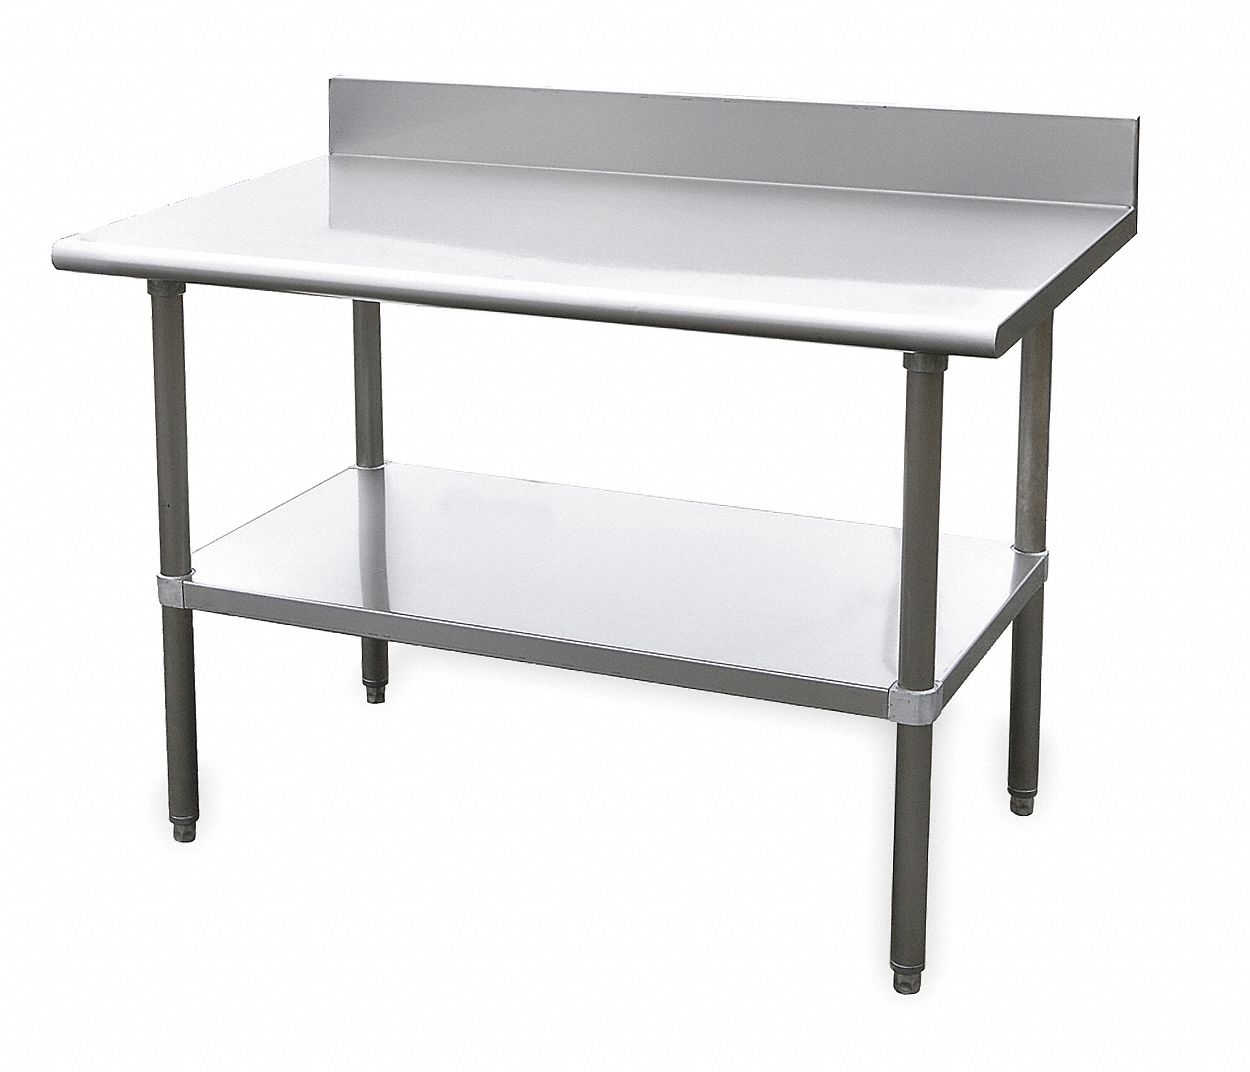 FIXED HEIGHT WORKTABLE 30X72 STAINLESS